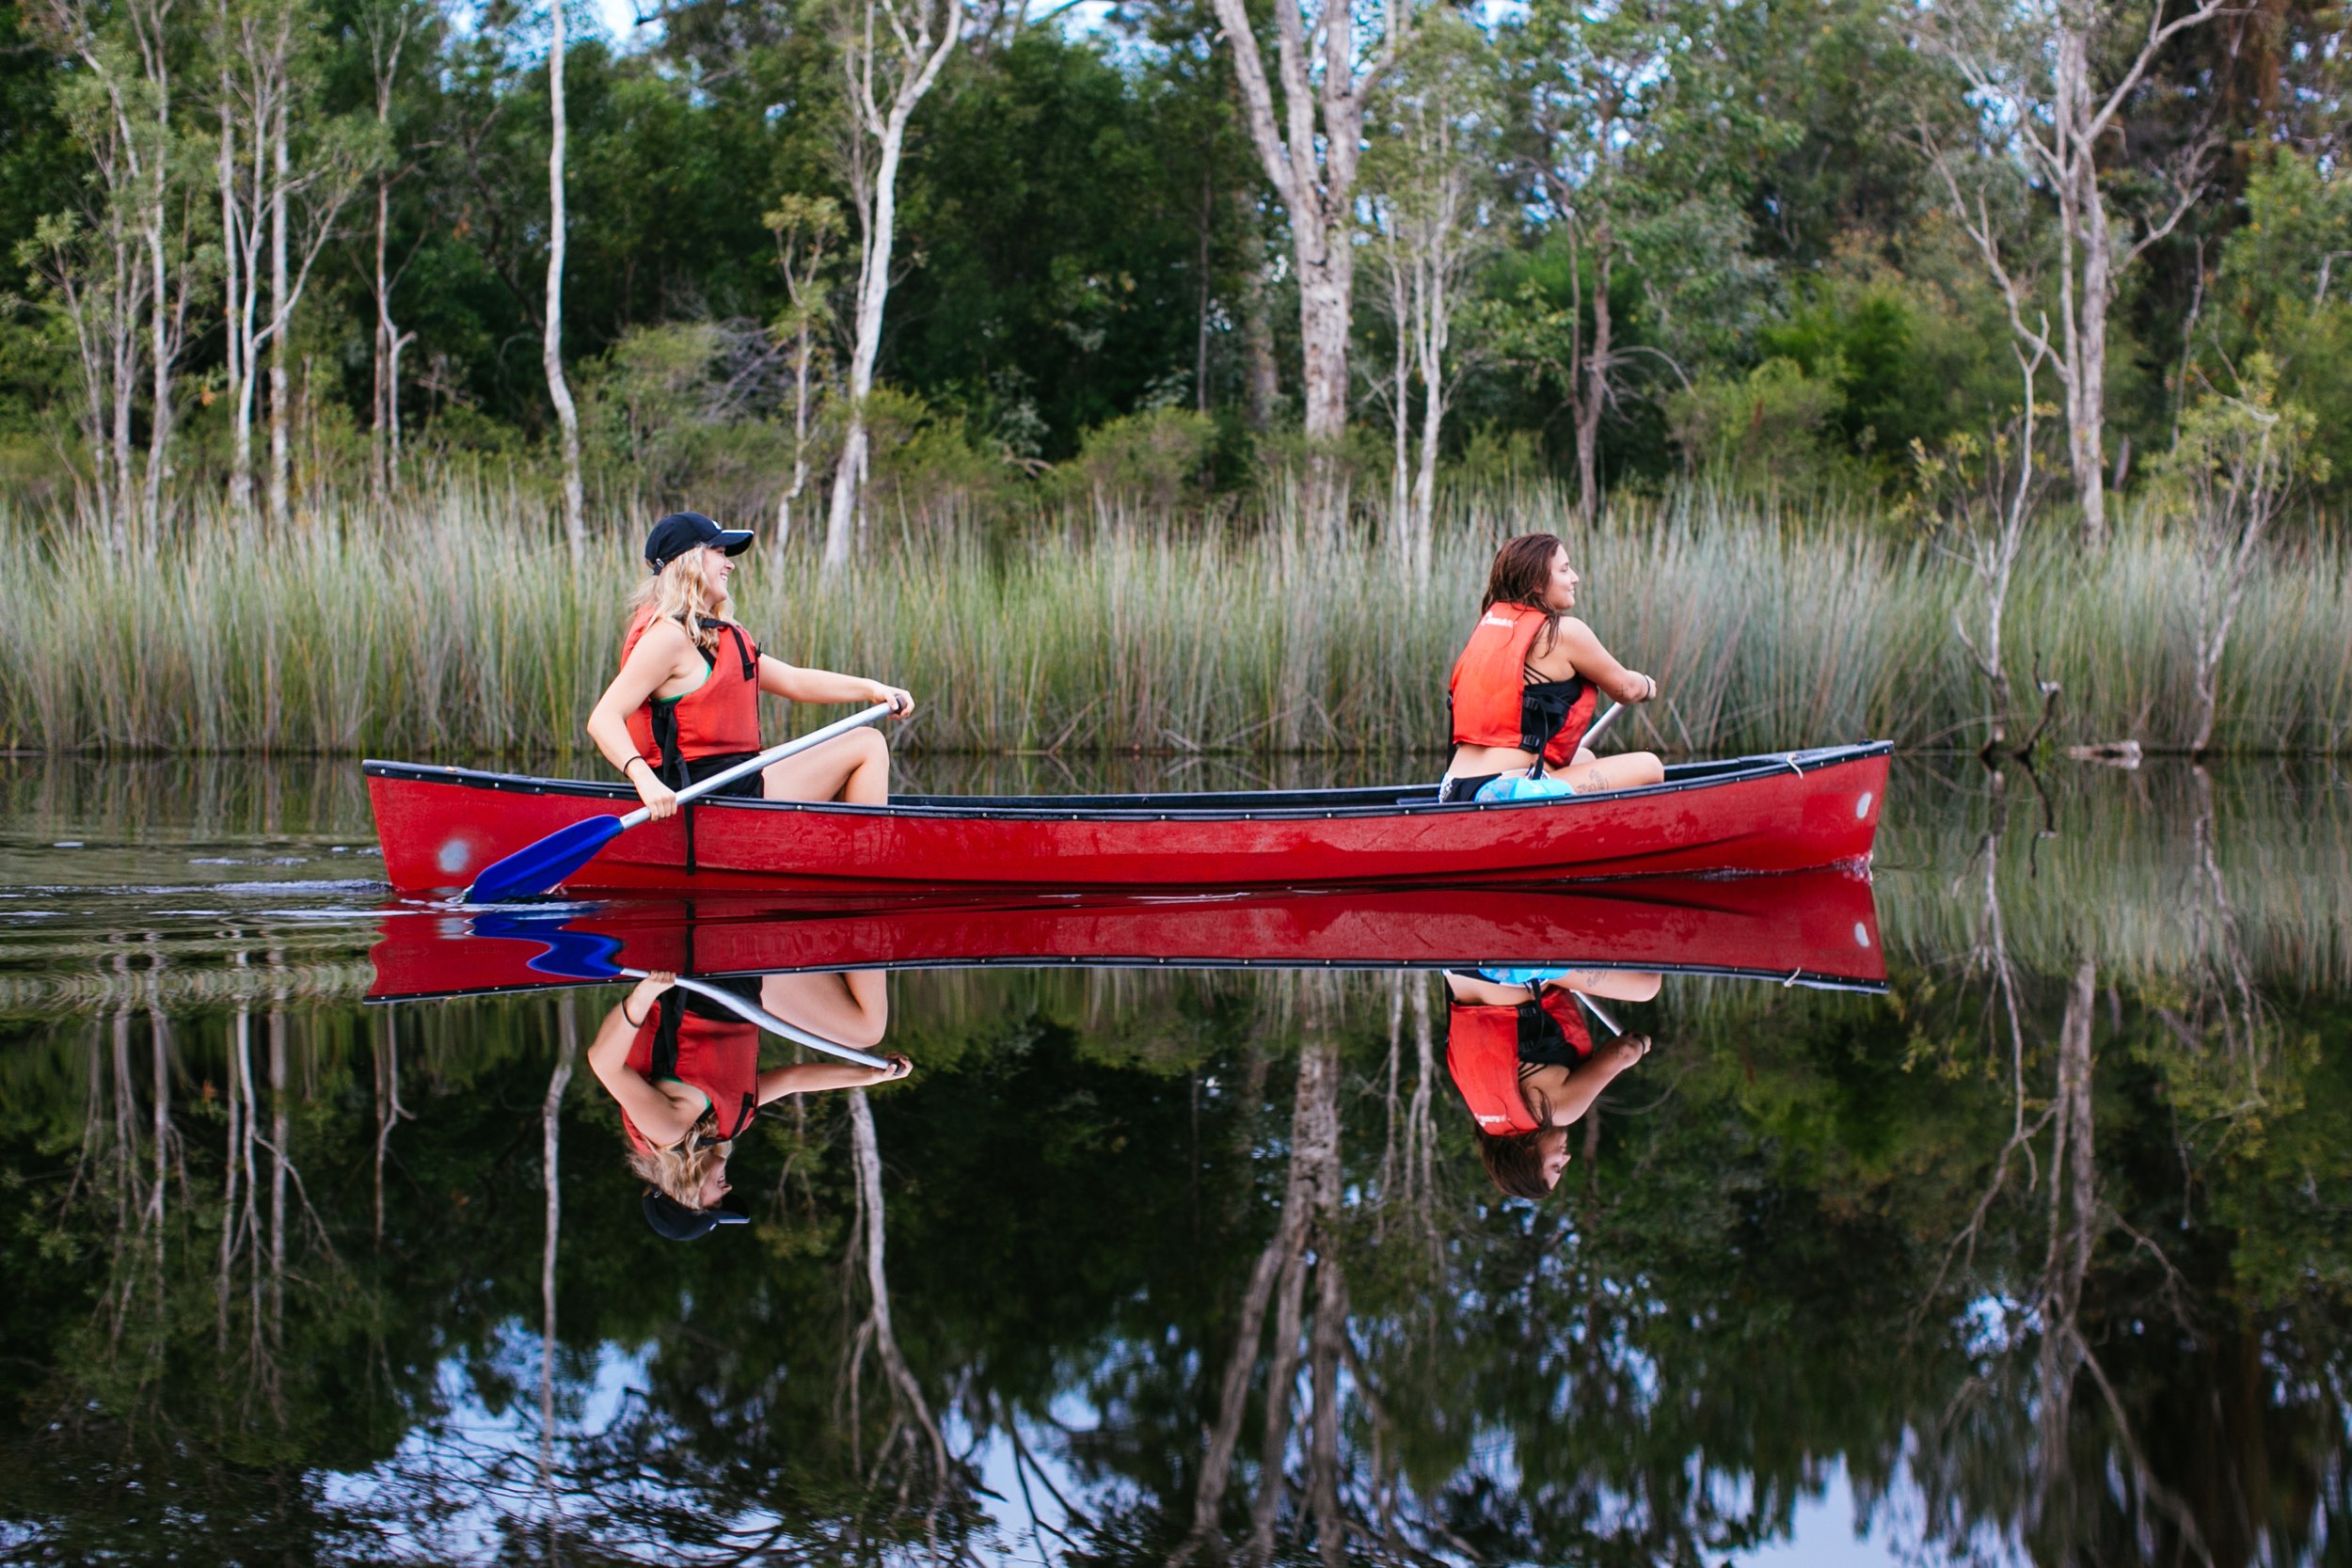 Reflections on the River of Mirrors  - 2 ladies canoeing in the Everglades